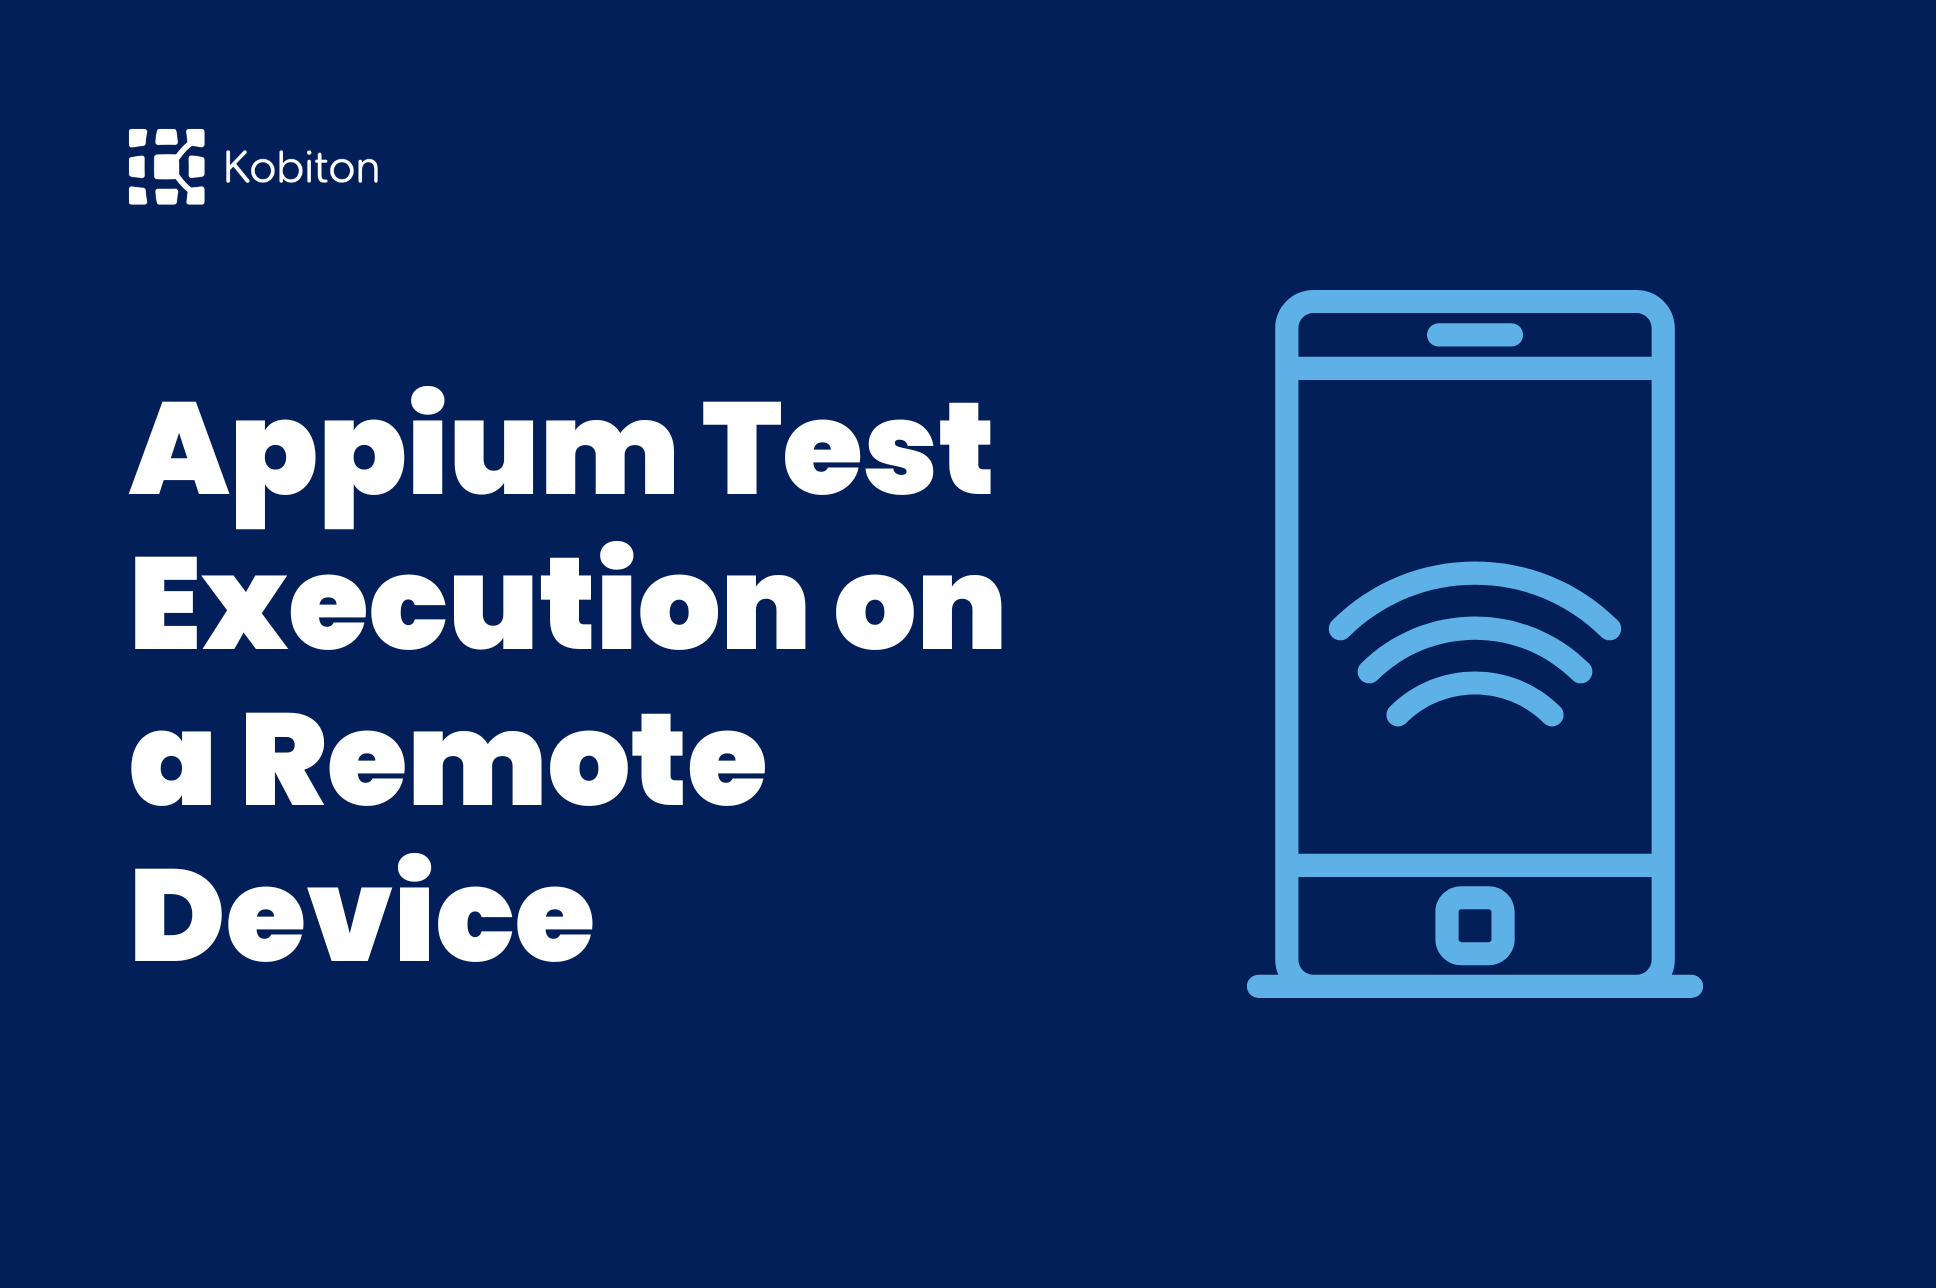 Appium Test Execution on a Remote Device